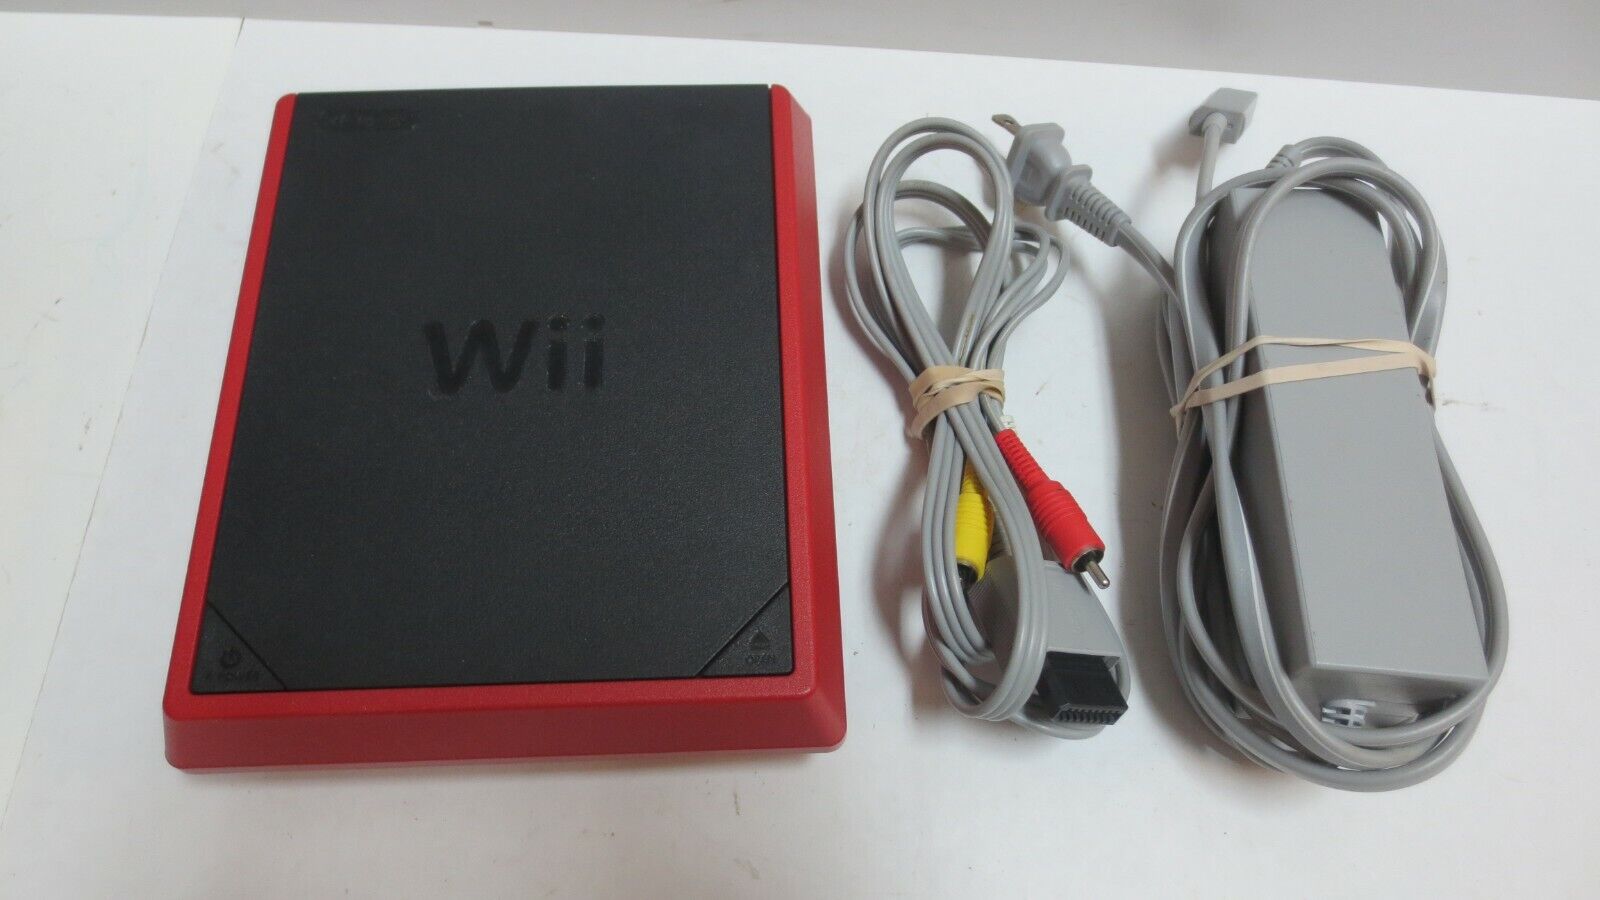 Nintendo Wii Mini Console RVL-201 - Red/Black - TESTED WORKS